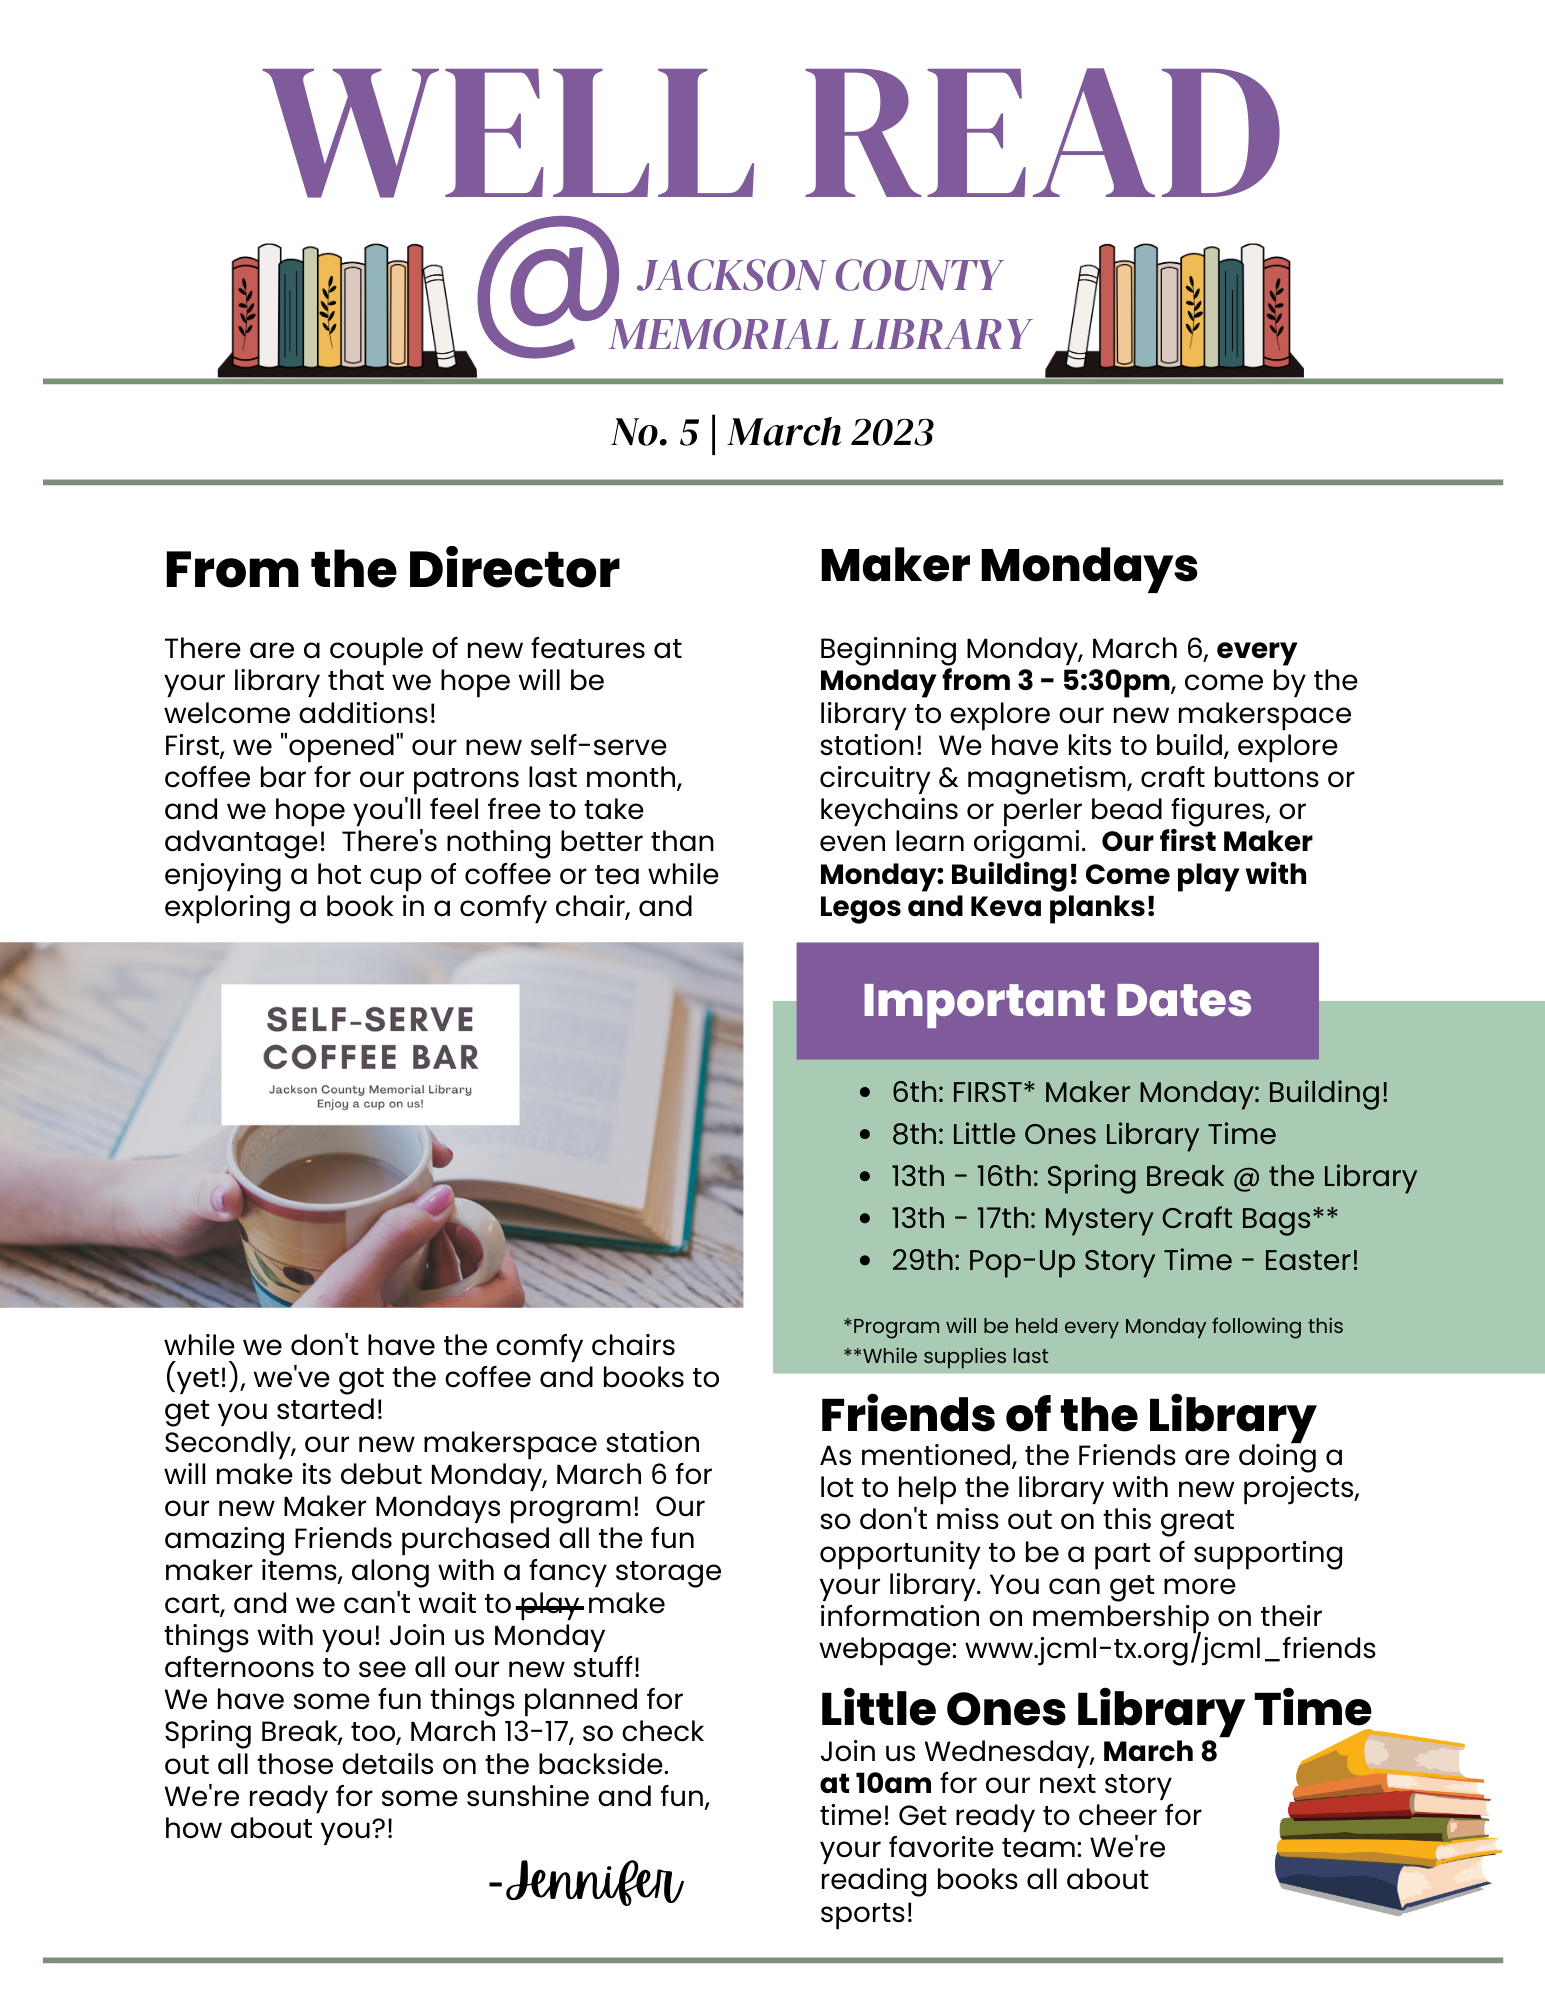 Mar 23 Library Newsletter_1.png